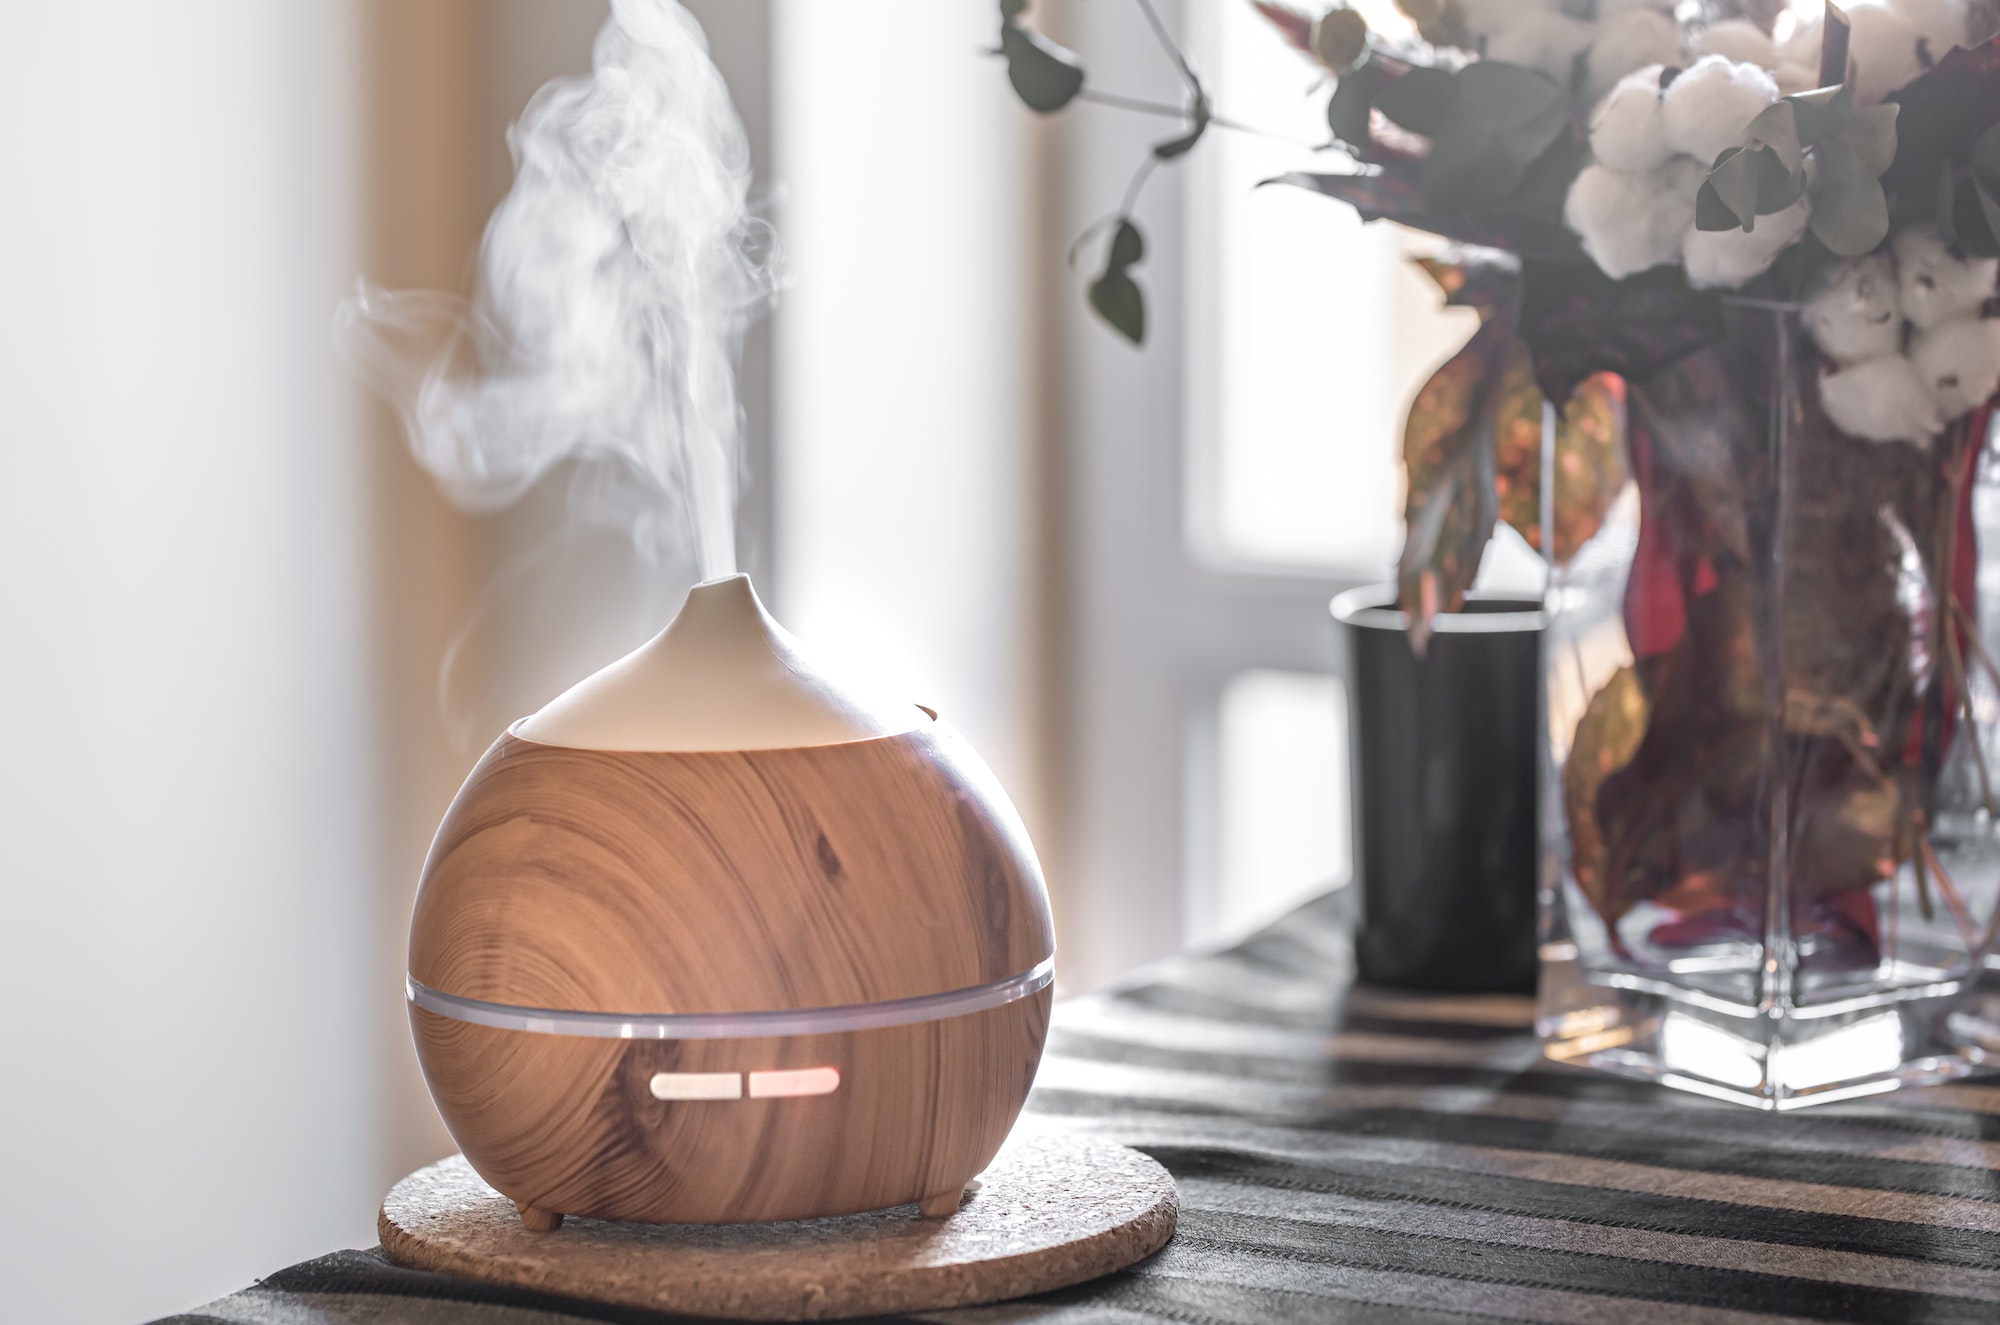 How to Clean an Essential Oil Diffuser